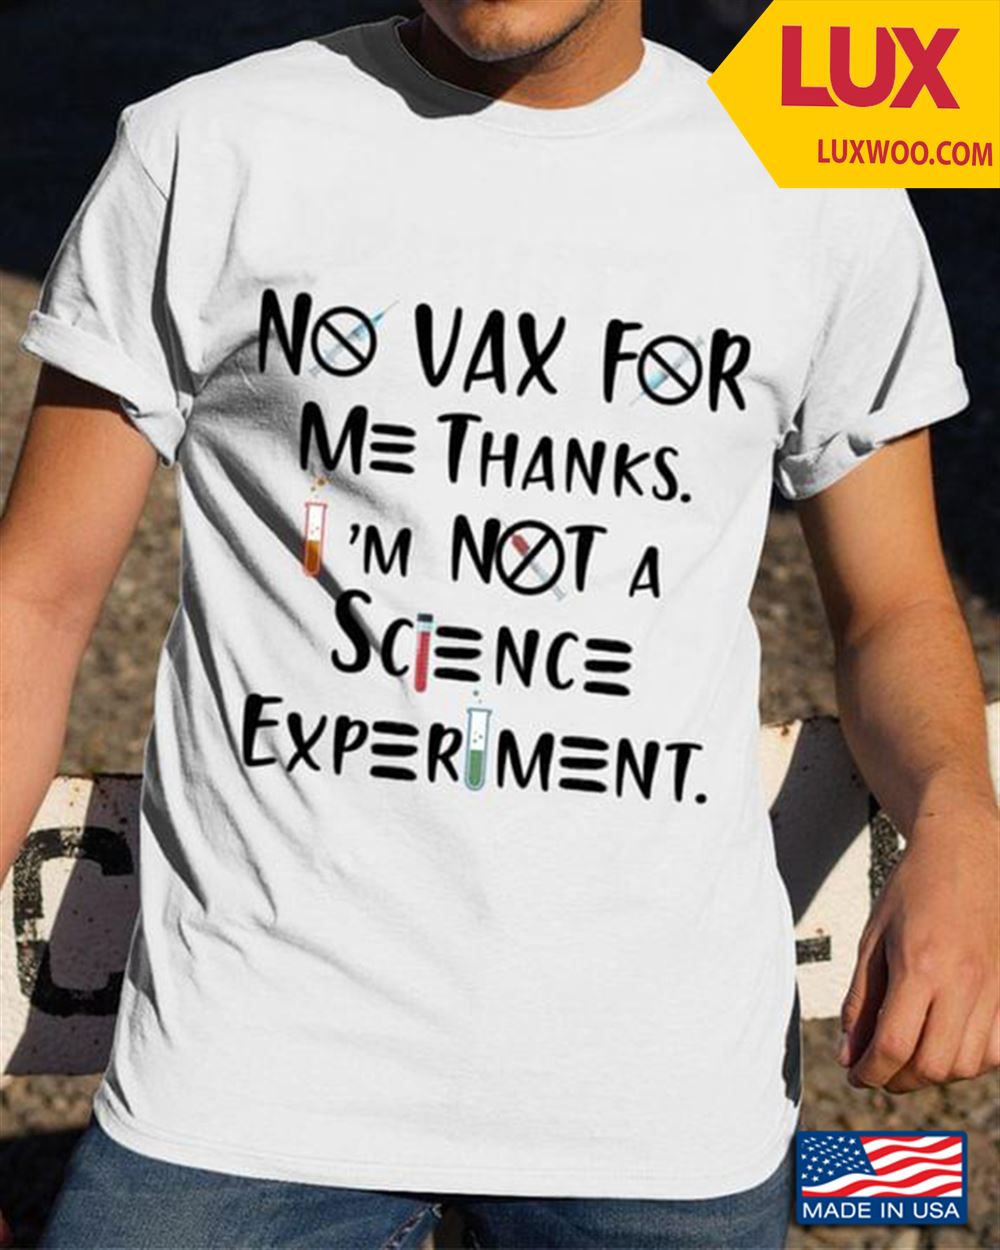 No Vax For Me Thanks Im Not A Science Experiment Tshirt Size Up To 5xl